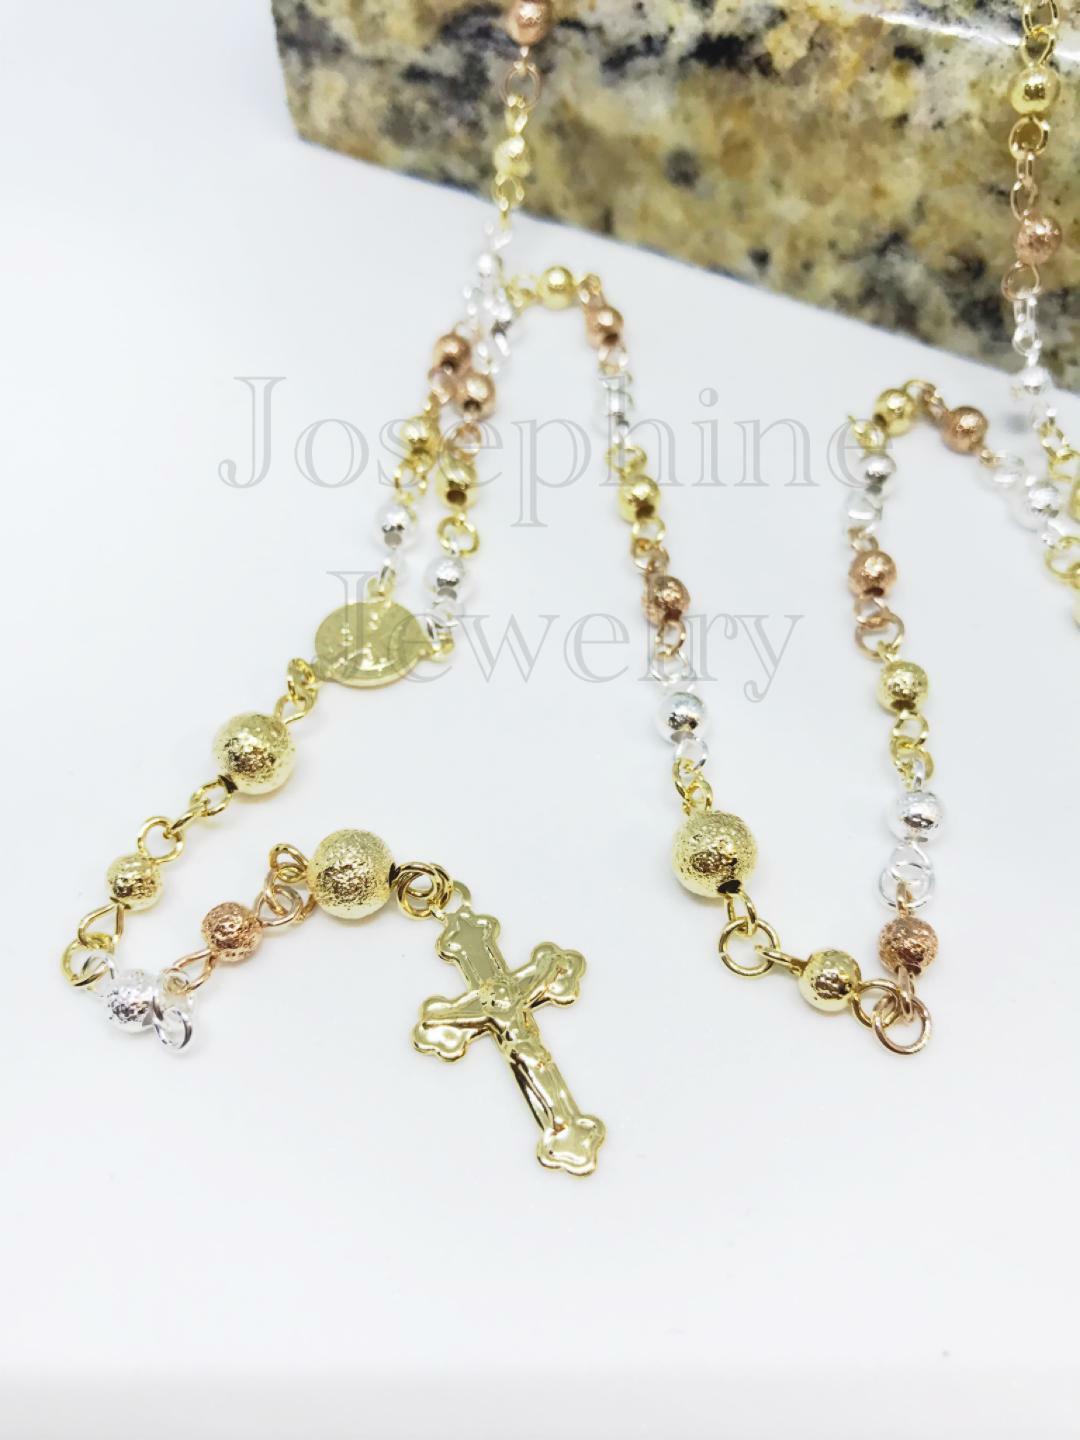 14k Gold Plated 3-Tone Rosary with Crucifix Polished Sanded/Frosted Beads 24"